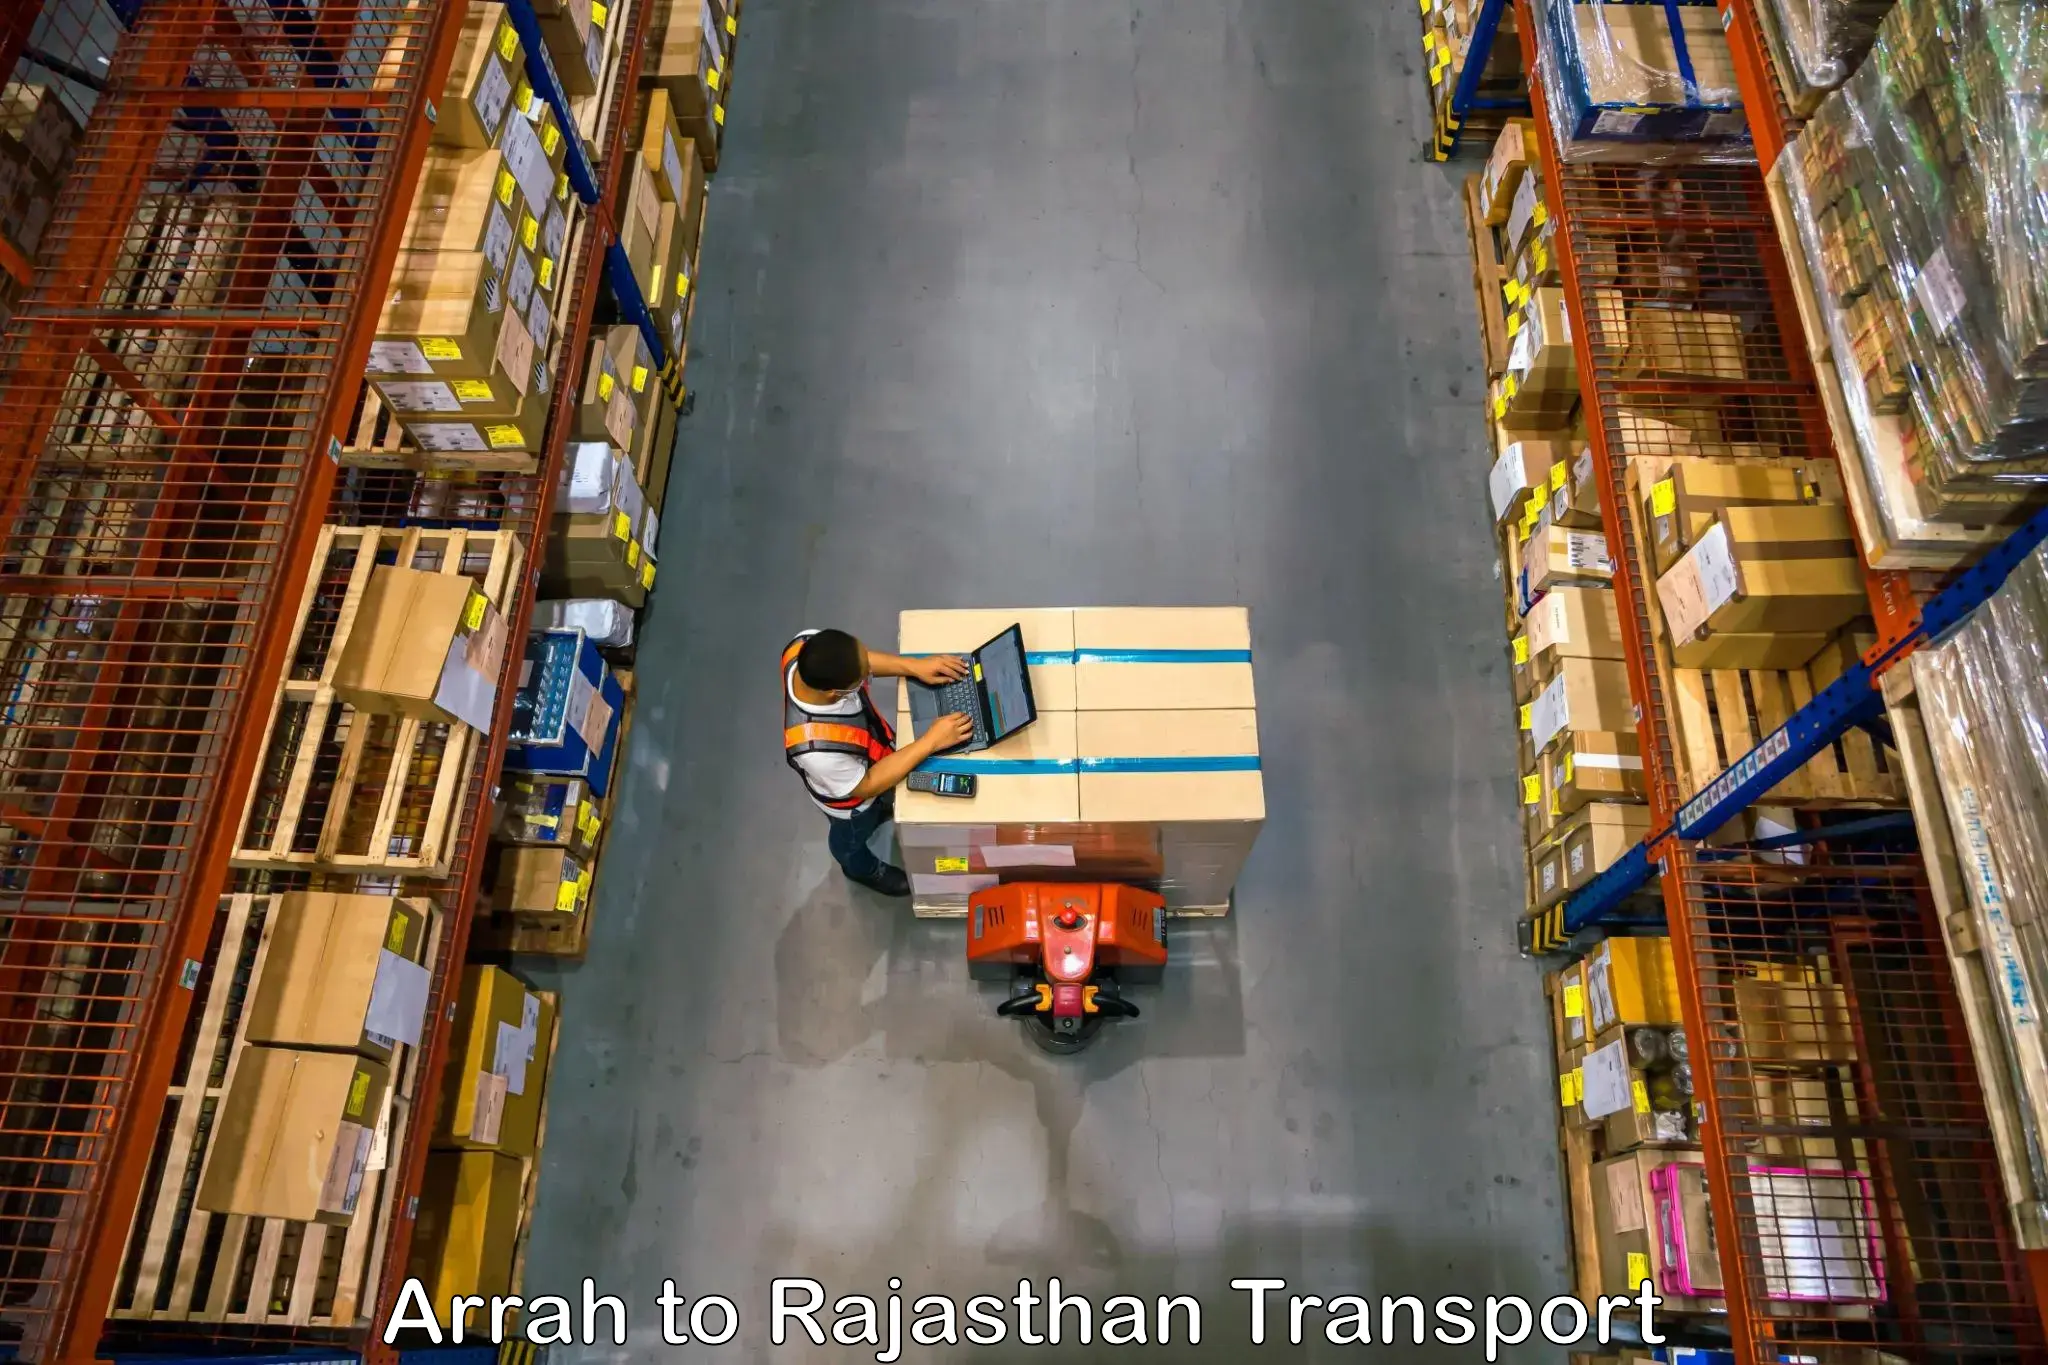 Lorry transport service Arrah to Yeswanthapur